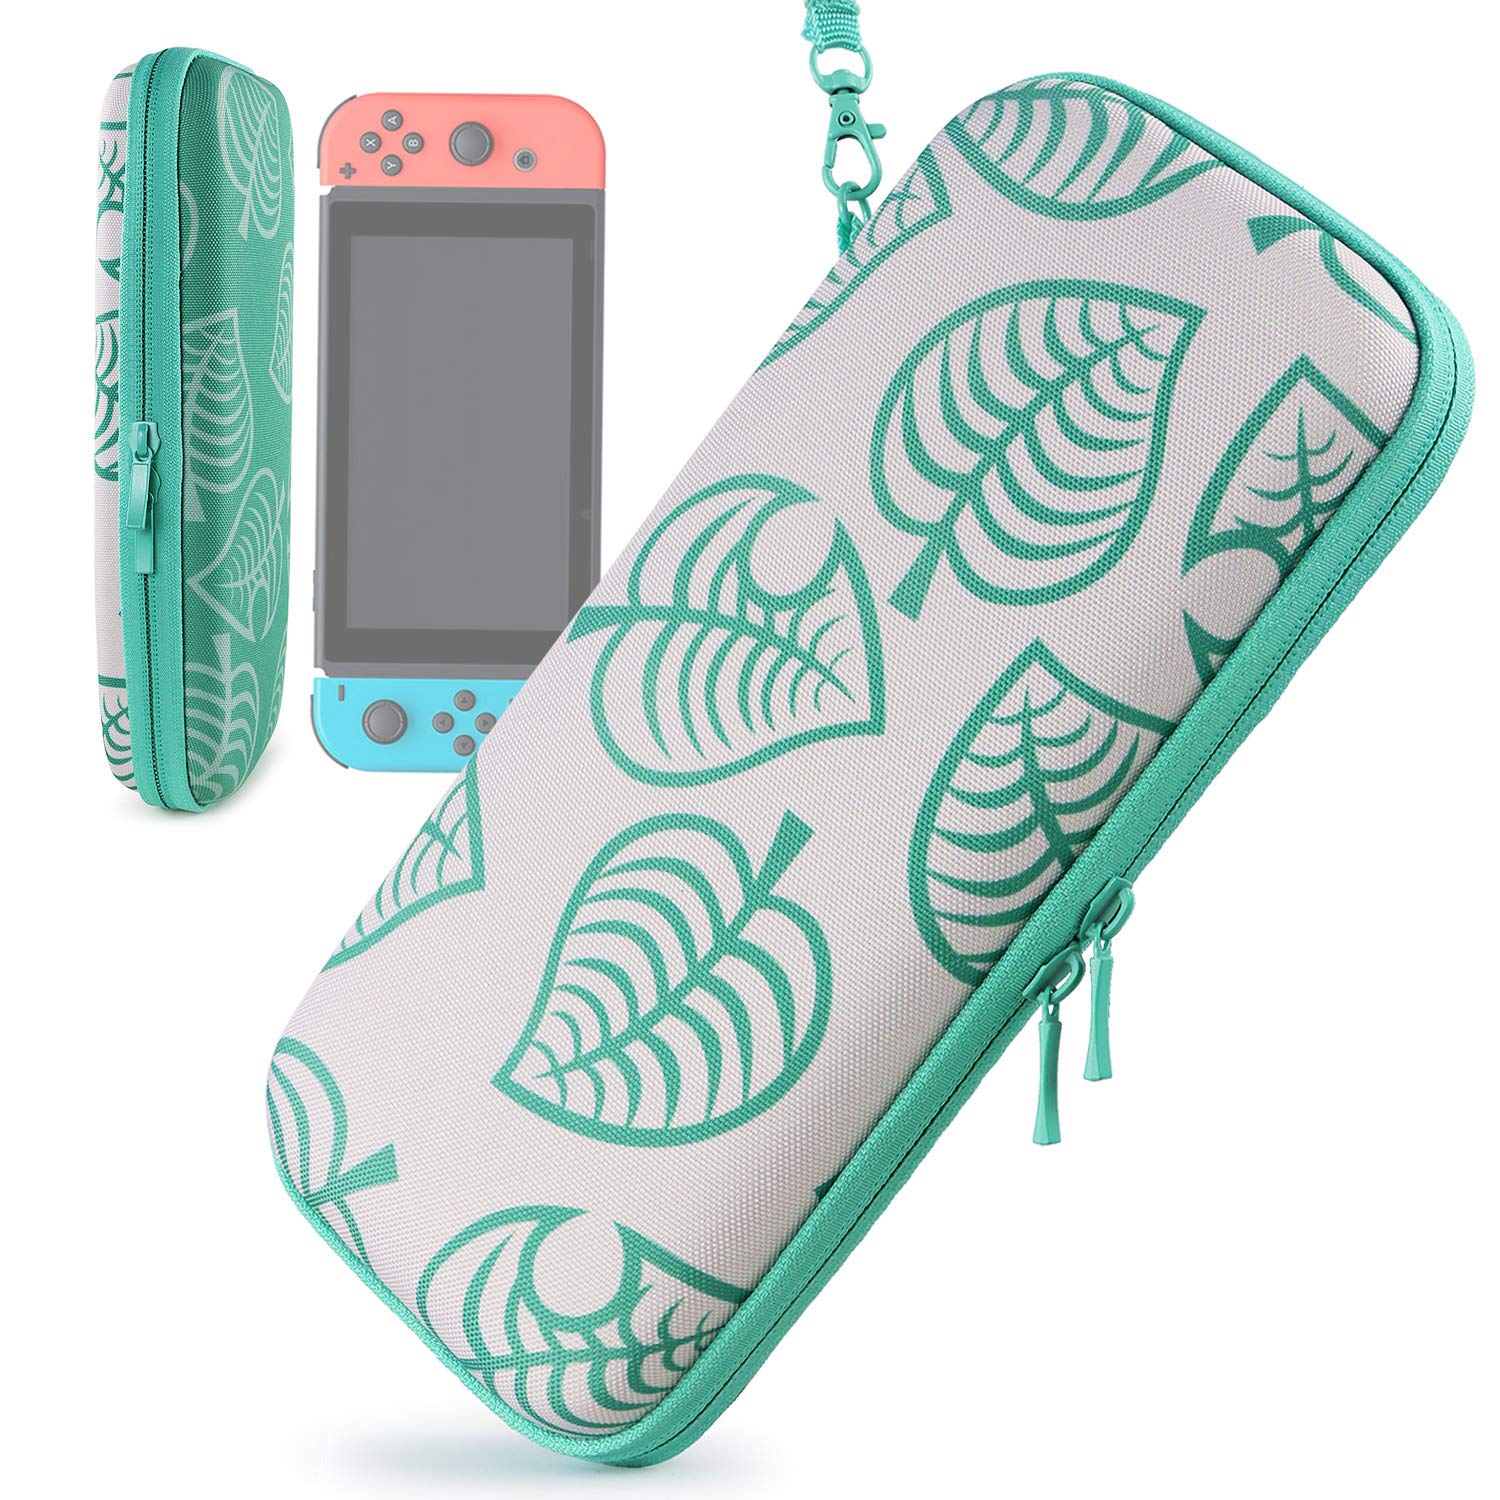 Leaf Crossing Deluxe Protective Case for Nintendo Switch: Optimal Storage Pouch for Console Accessories & 8 Games - Ideal for Boys & Girls.